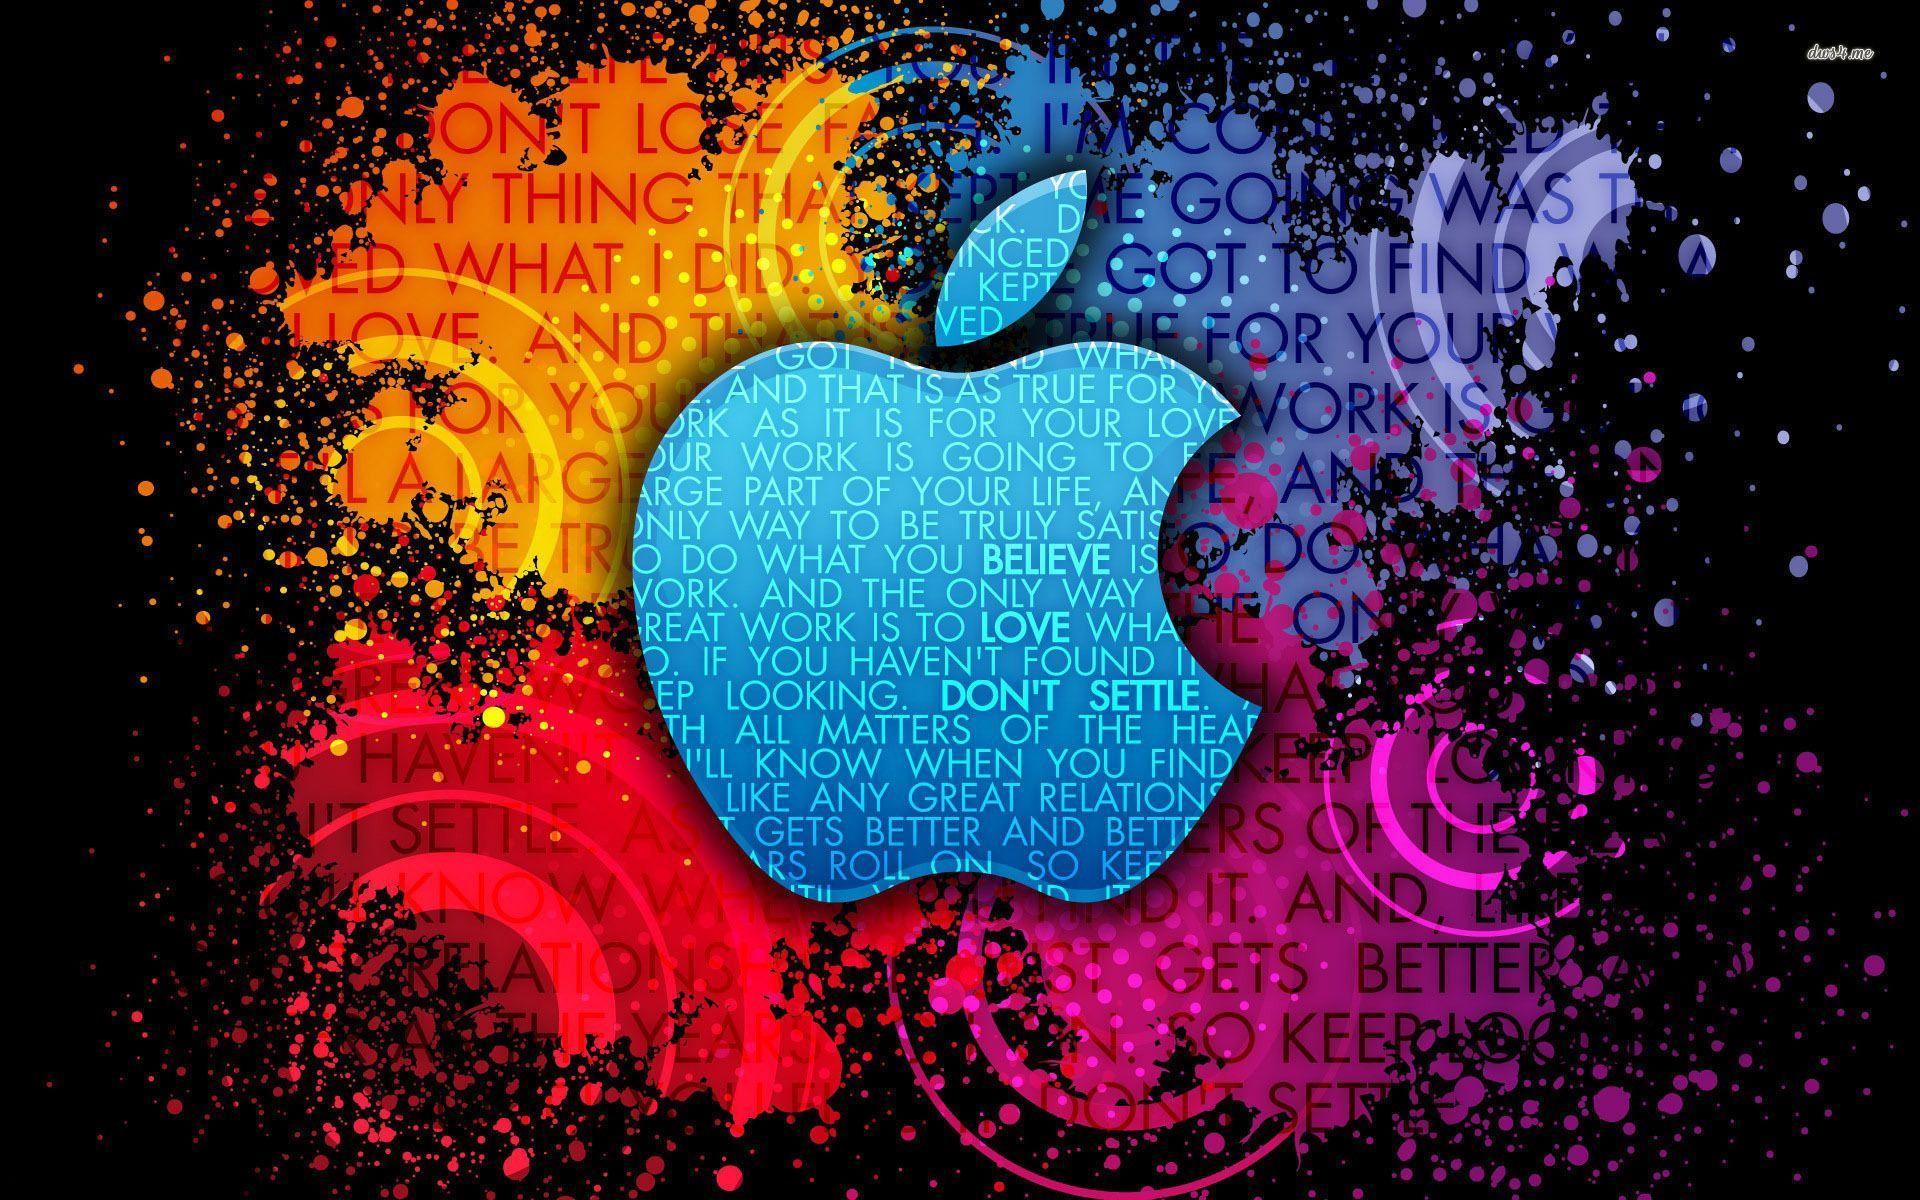 Amazing Apple Logo Picture HD Wallpaper for PC & Mac, Tablet